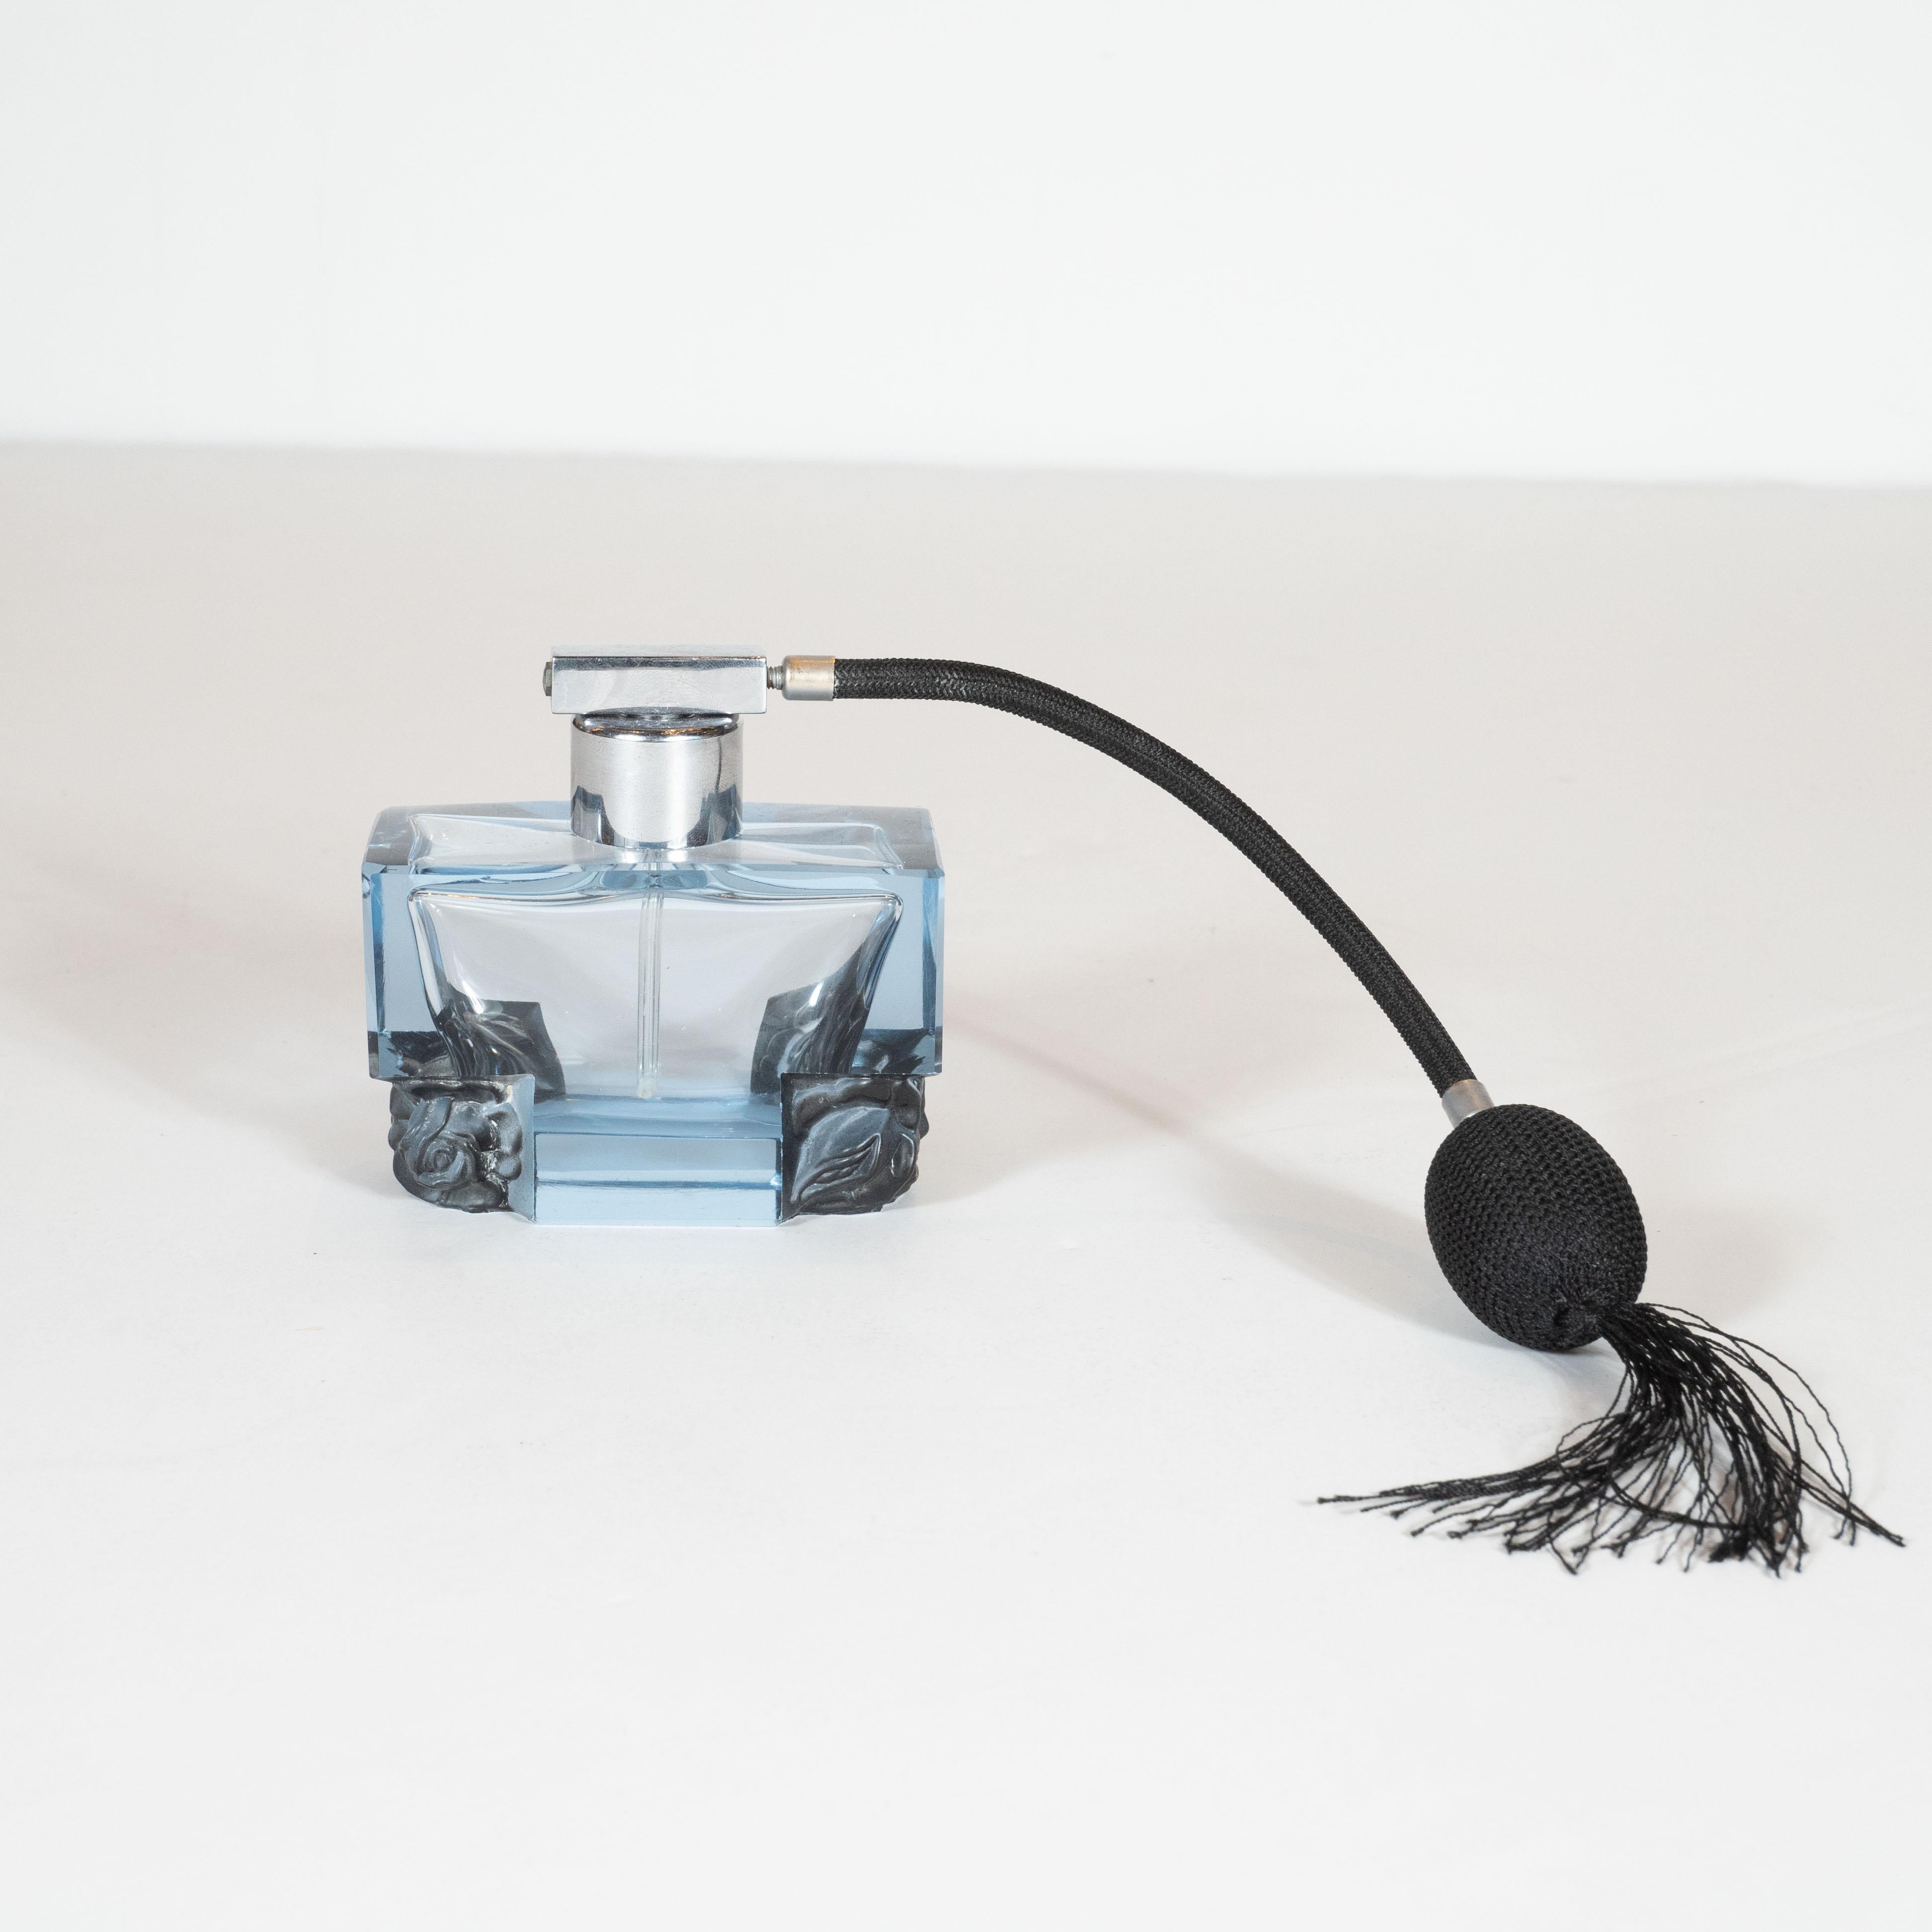 This stunning Art Deco perfume atomizer was handcrafted in Czechoslovakia, circa 1930. Composed of a blown and hand pressed glass faceted body in a beautiful translucent sapphire hue, this atomizer/ decorative object offers a stylized floral rose